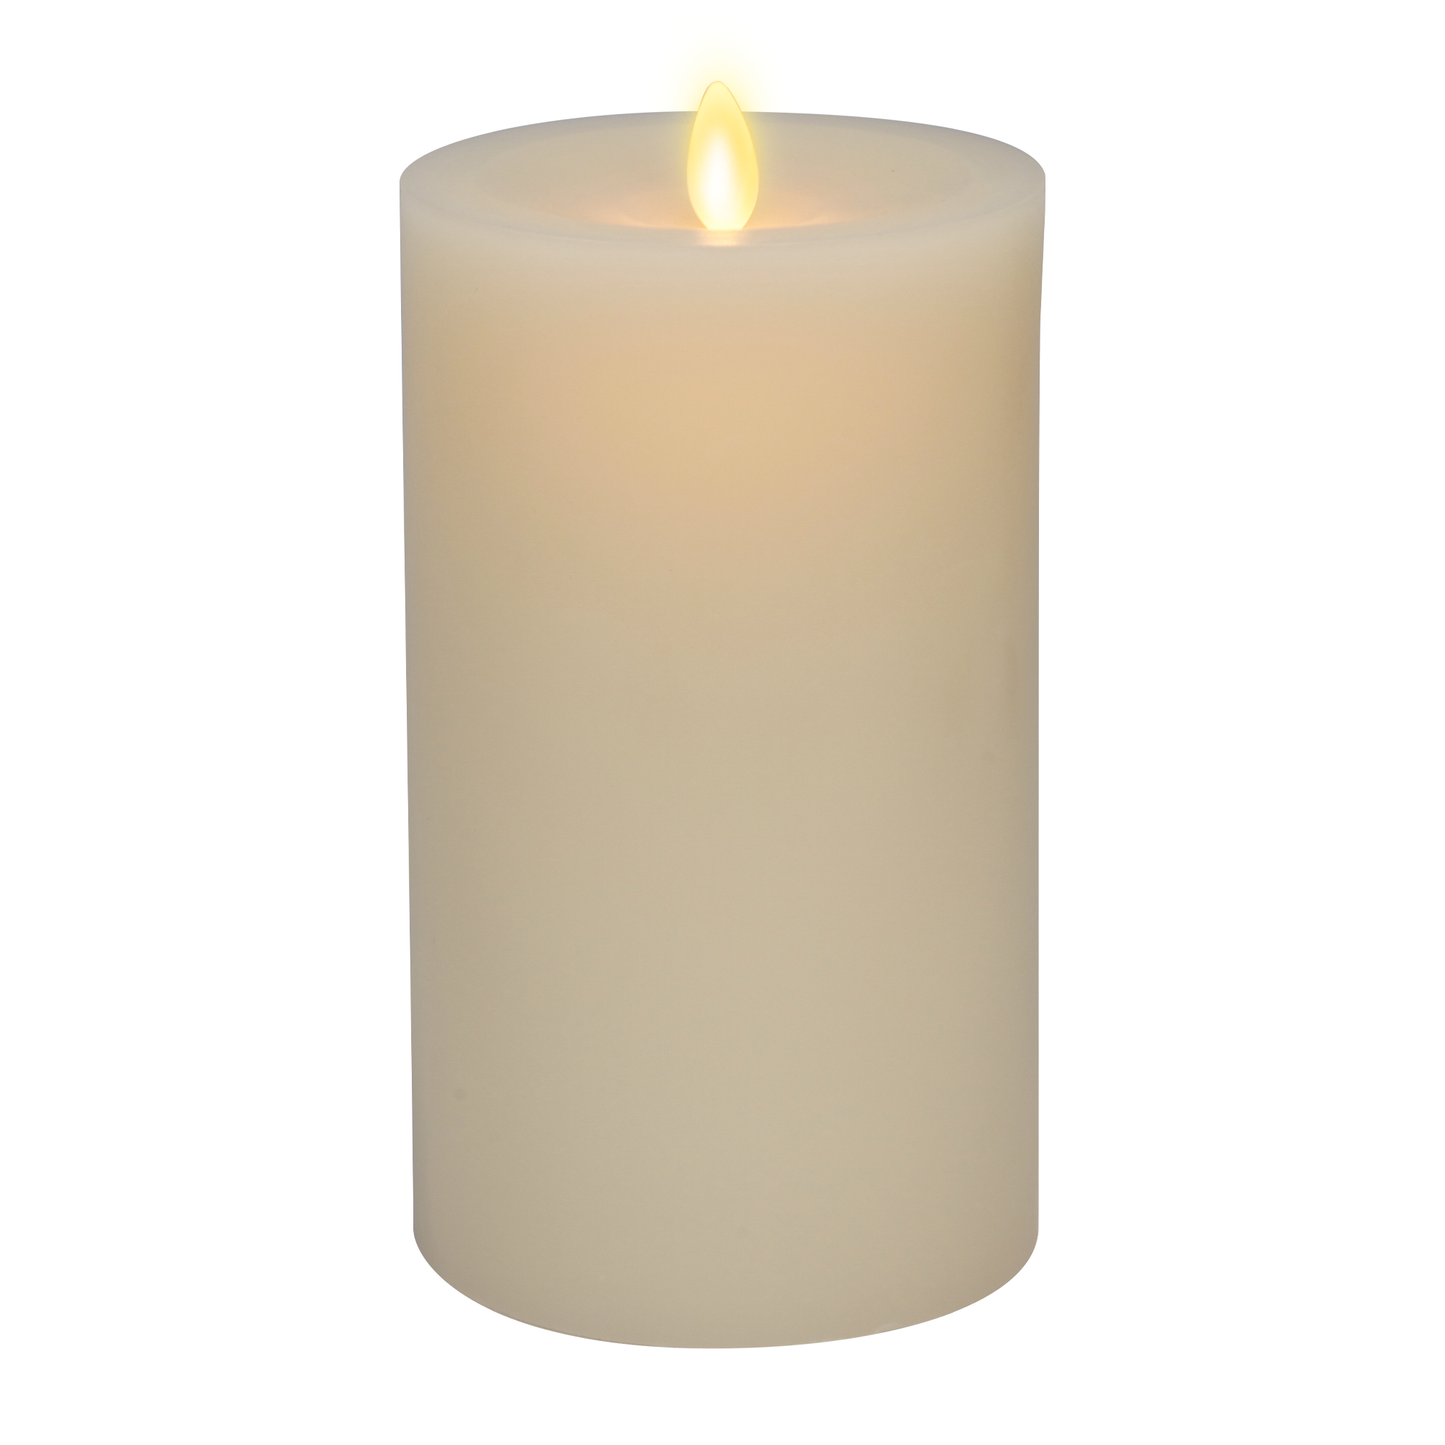 an image of Luminara's wick to flame pearl ivory flameless candles